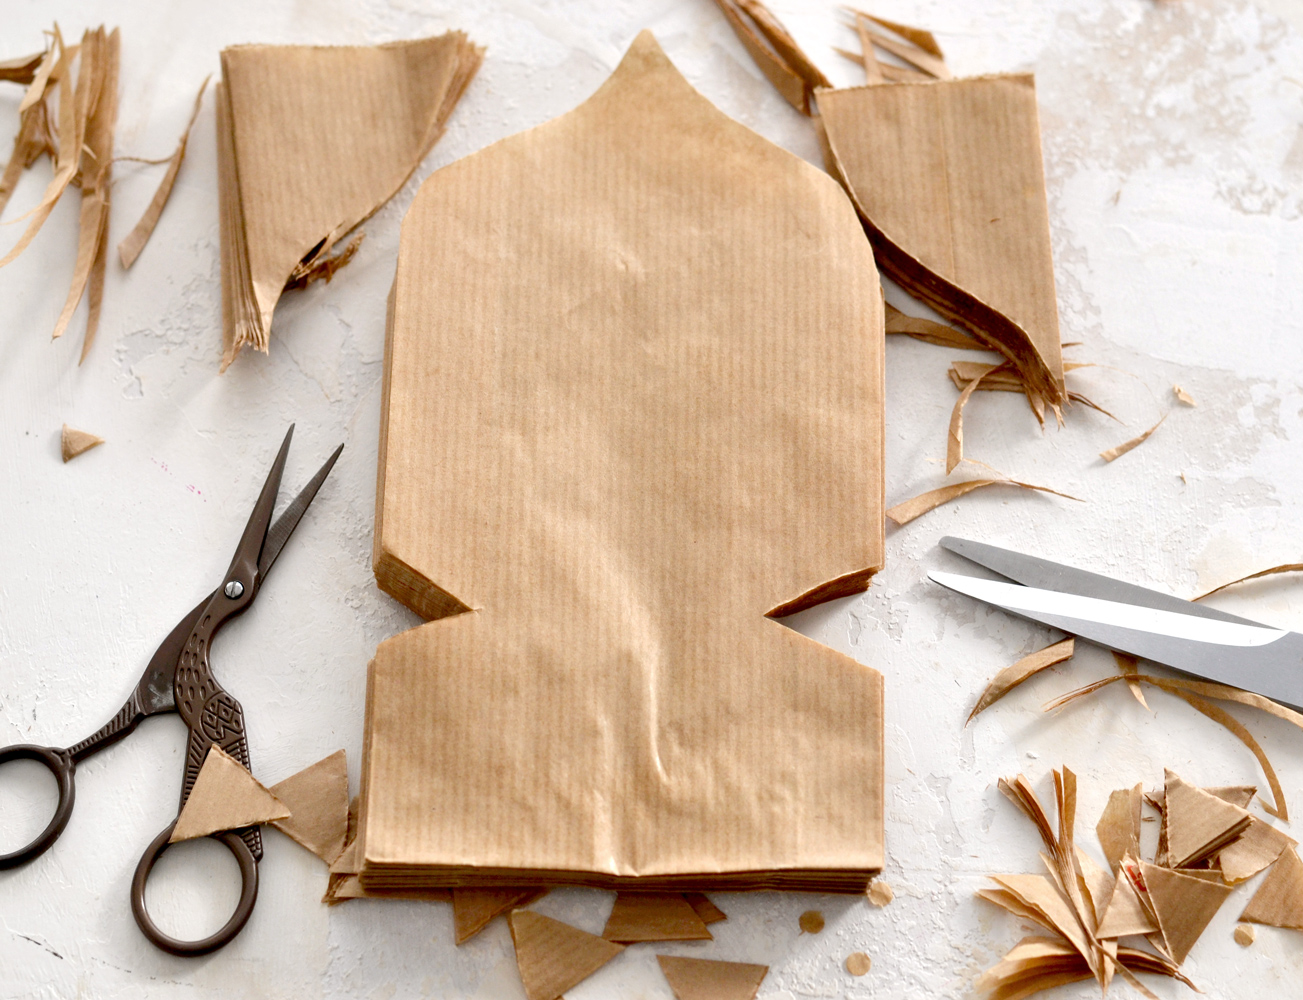 How to cut the second design of the paper bag stars